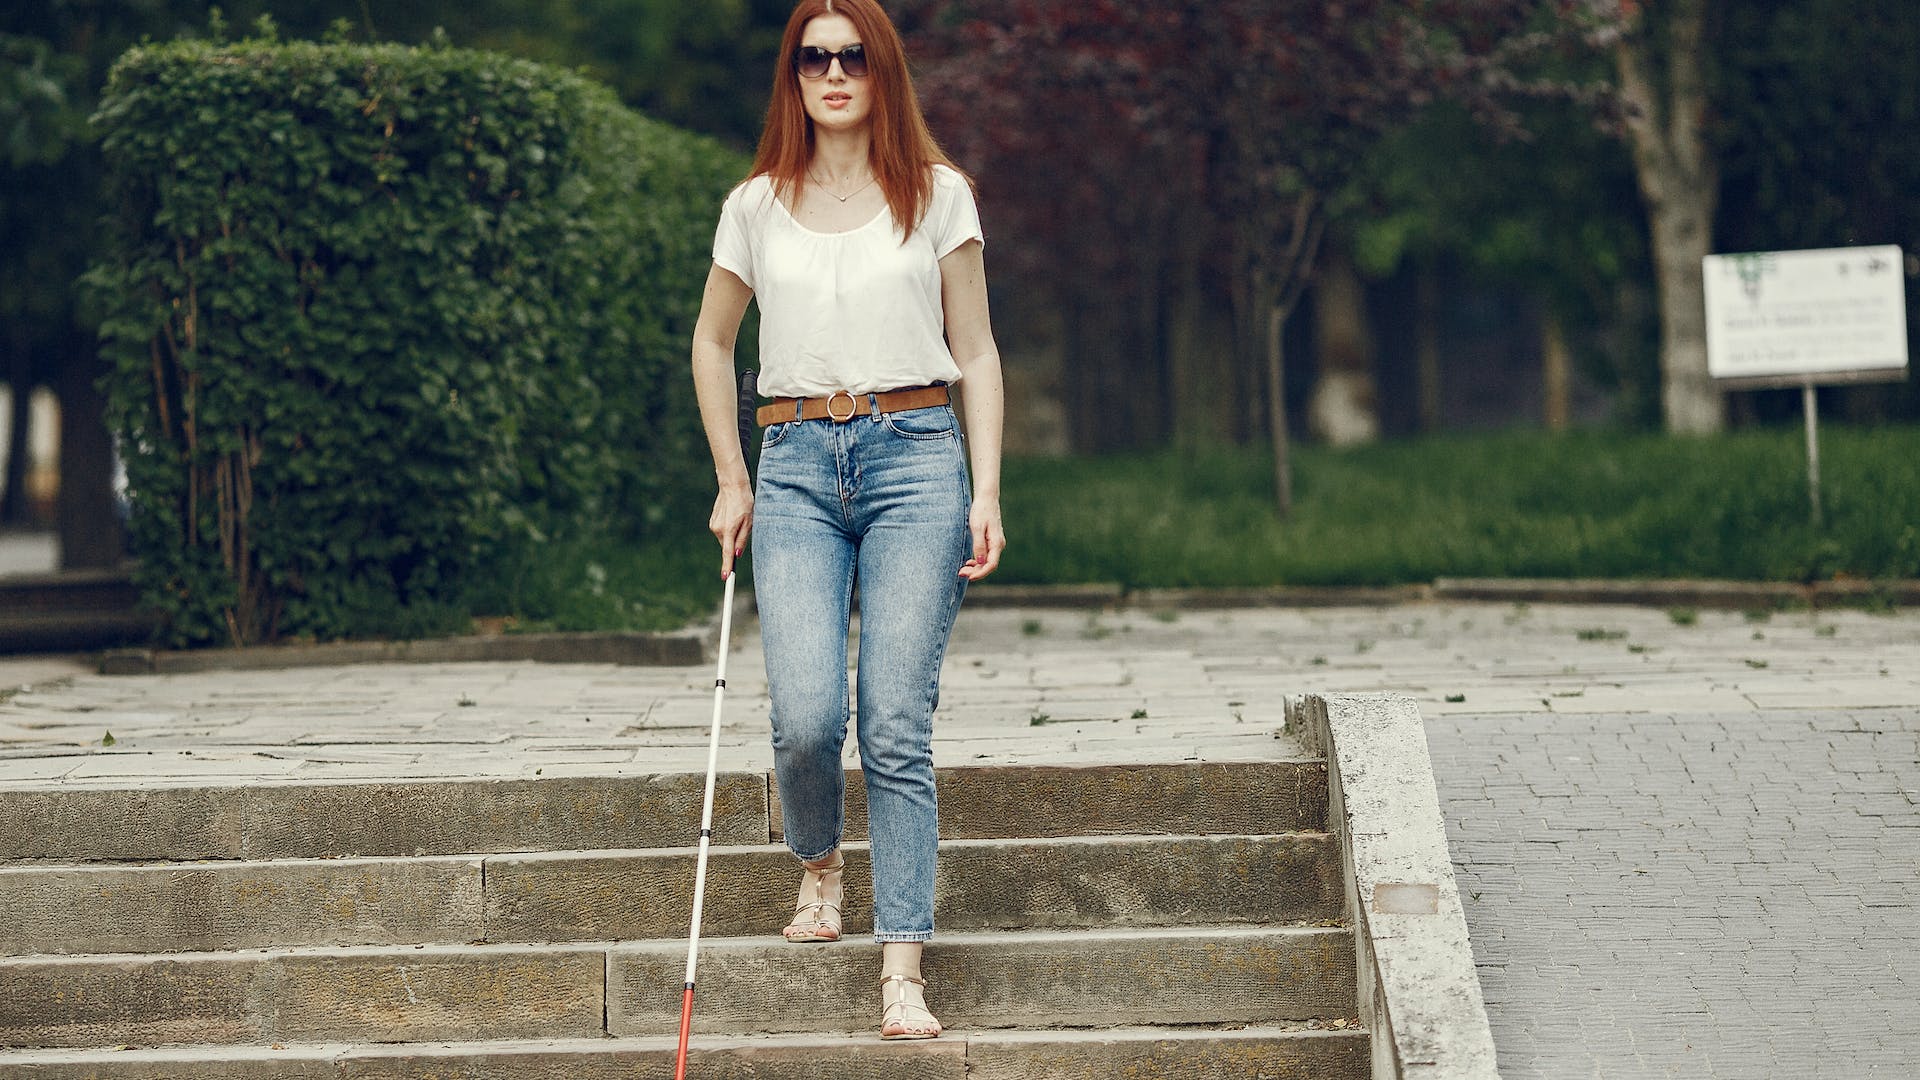 Woman Walking Blind with Cane